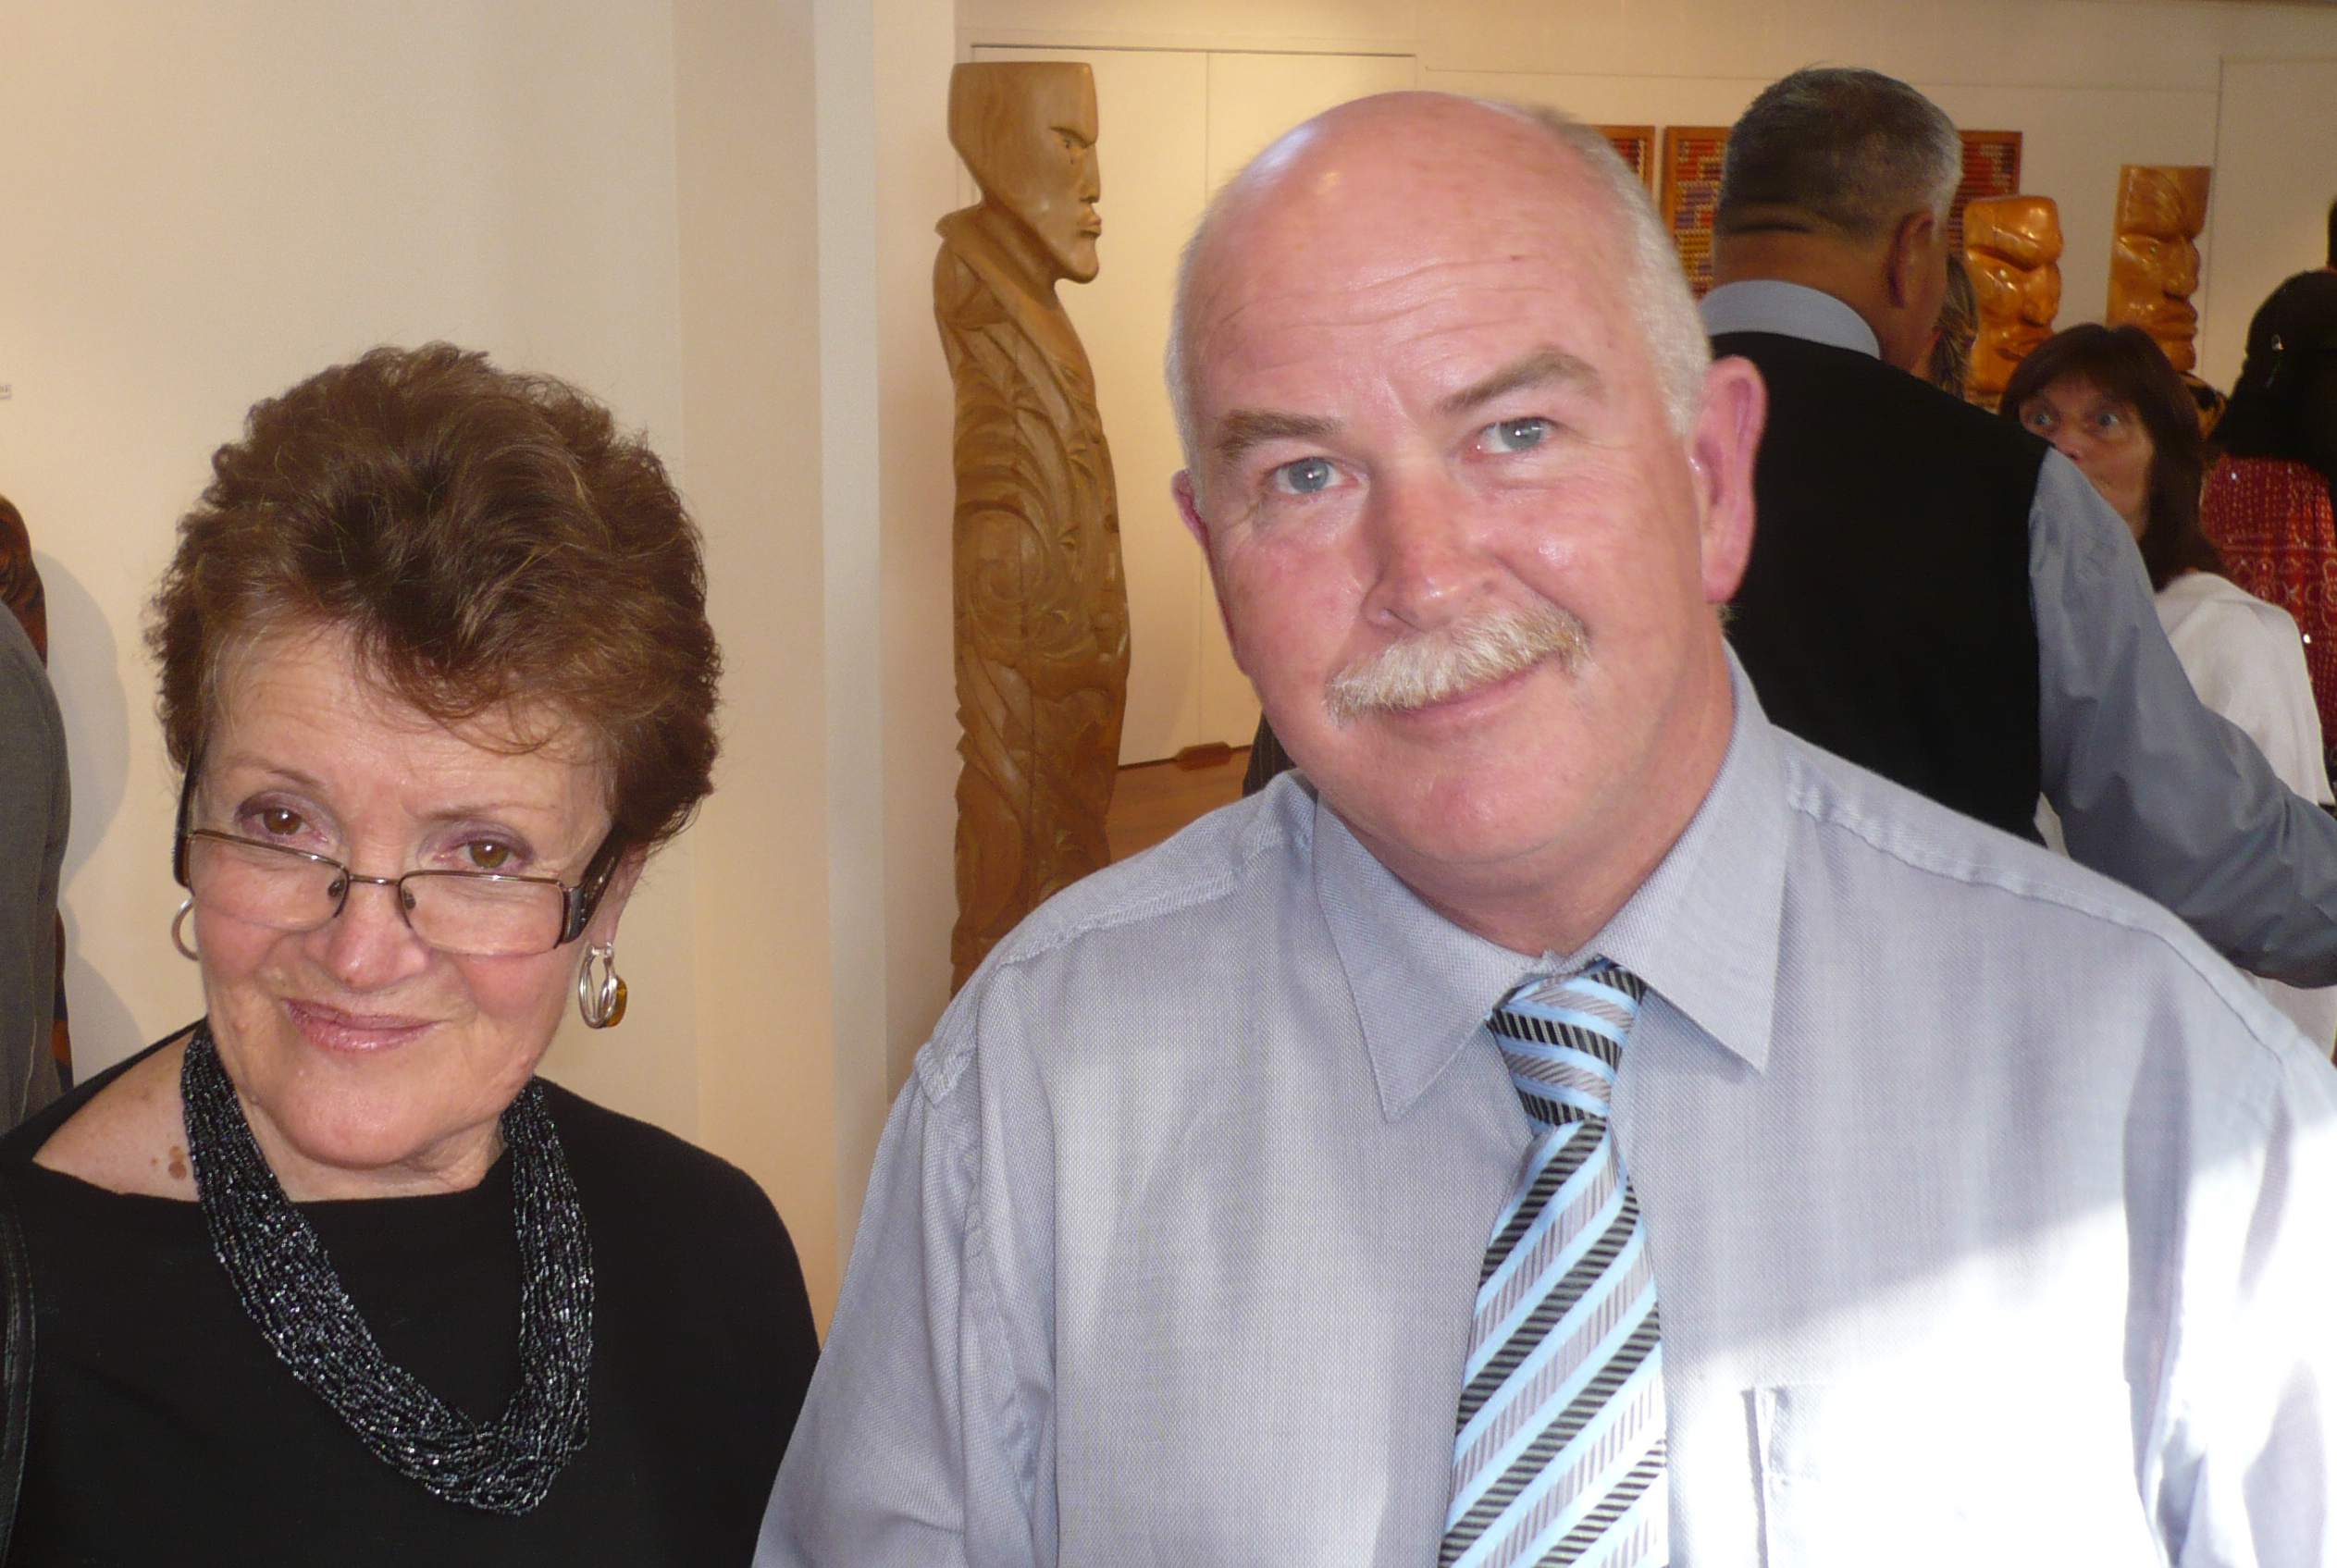 Moana Tipa and Mark Lynds, Department of Corrections, at the InsideOut exhibition opening at Mairangi Arts Centre